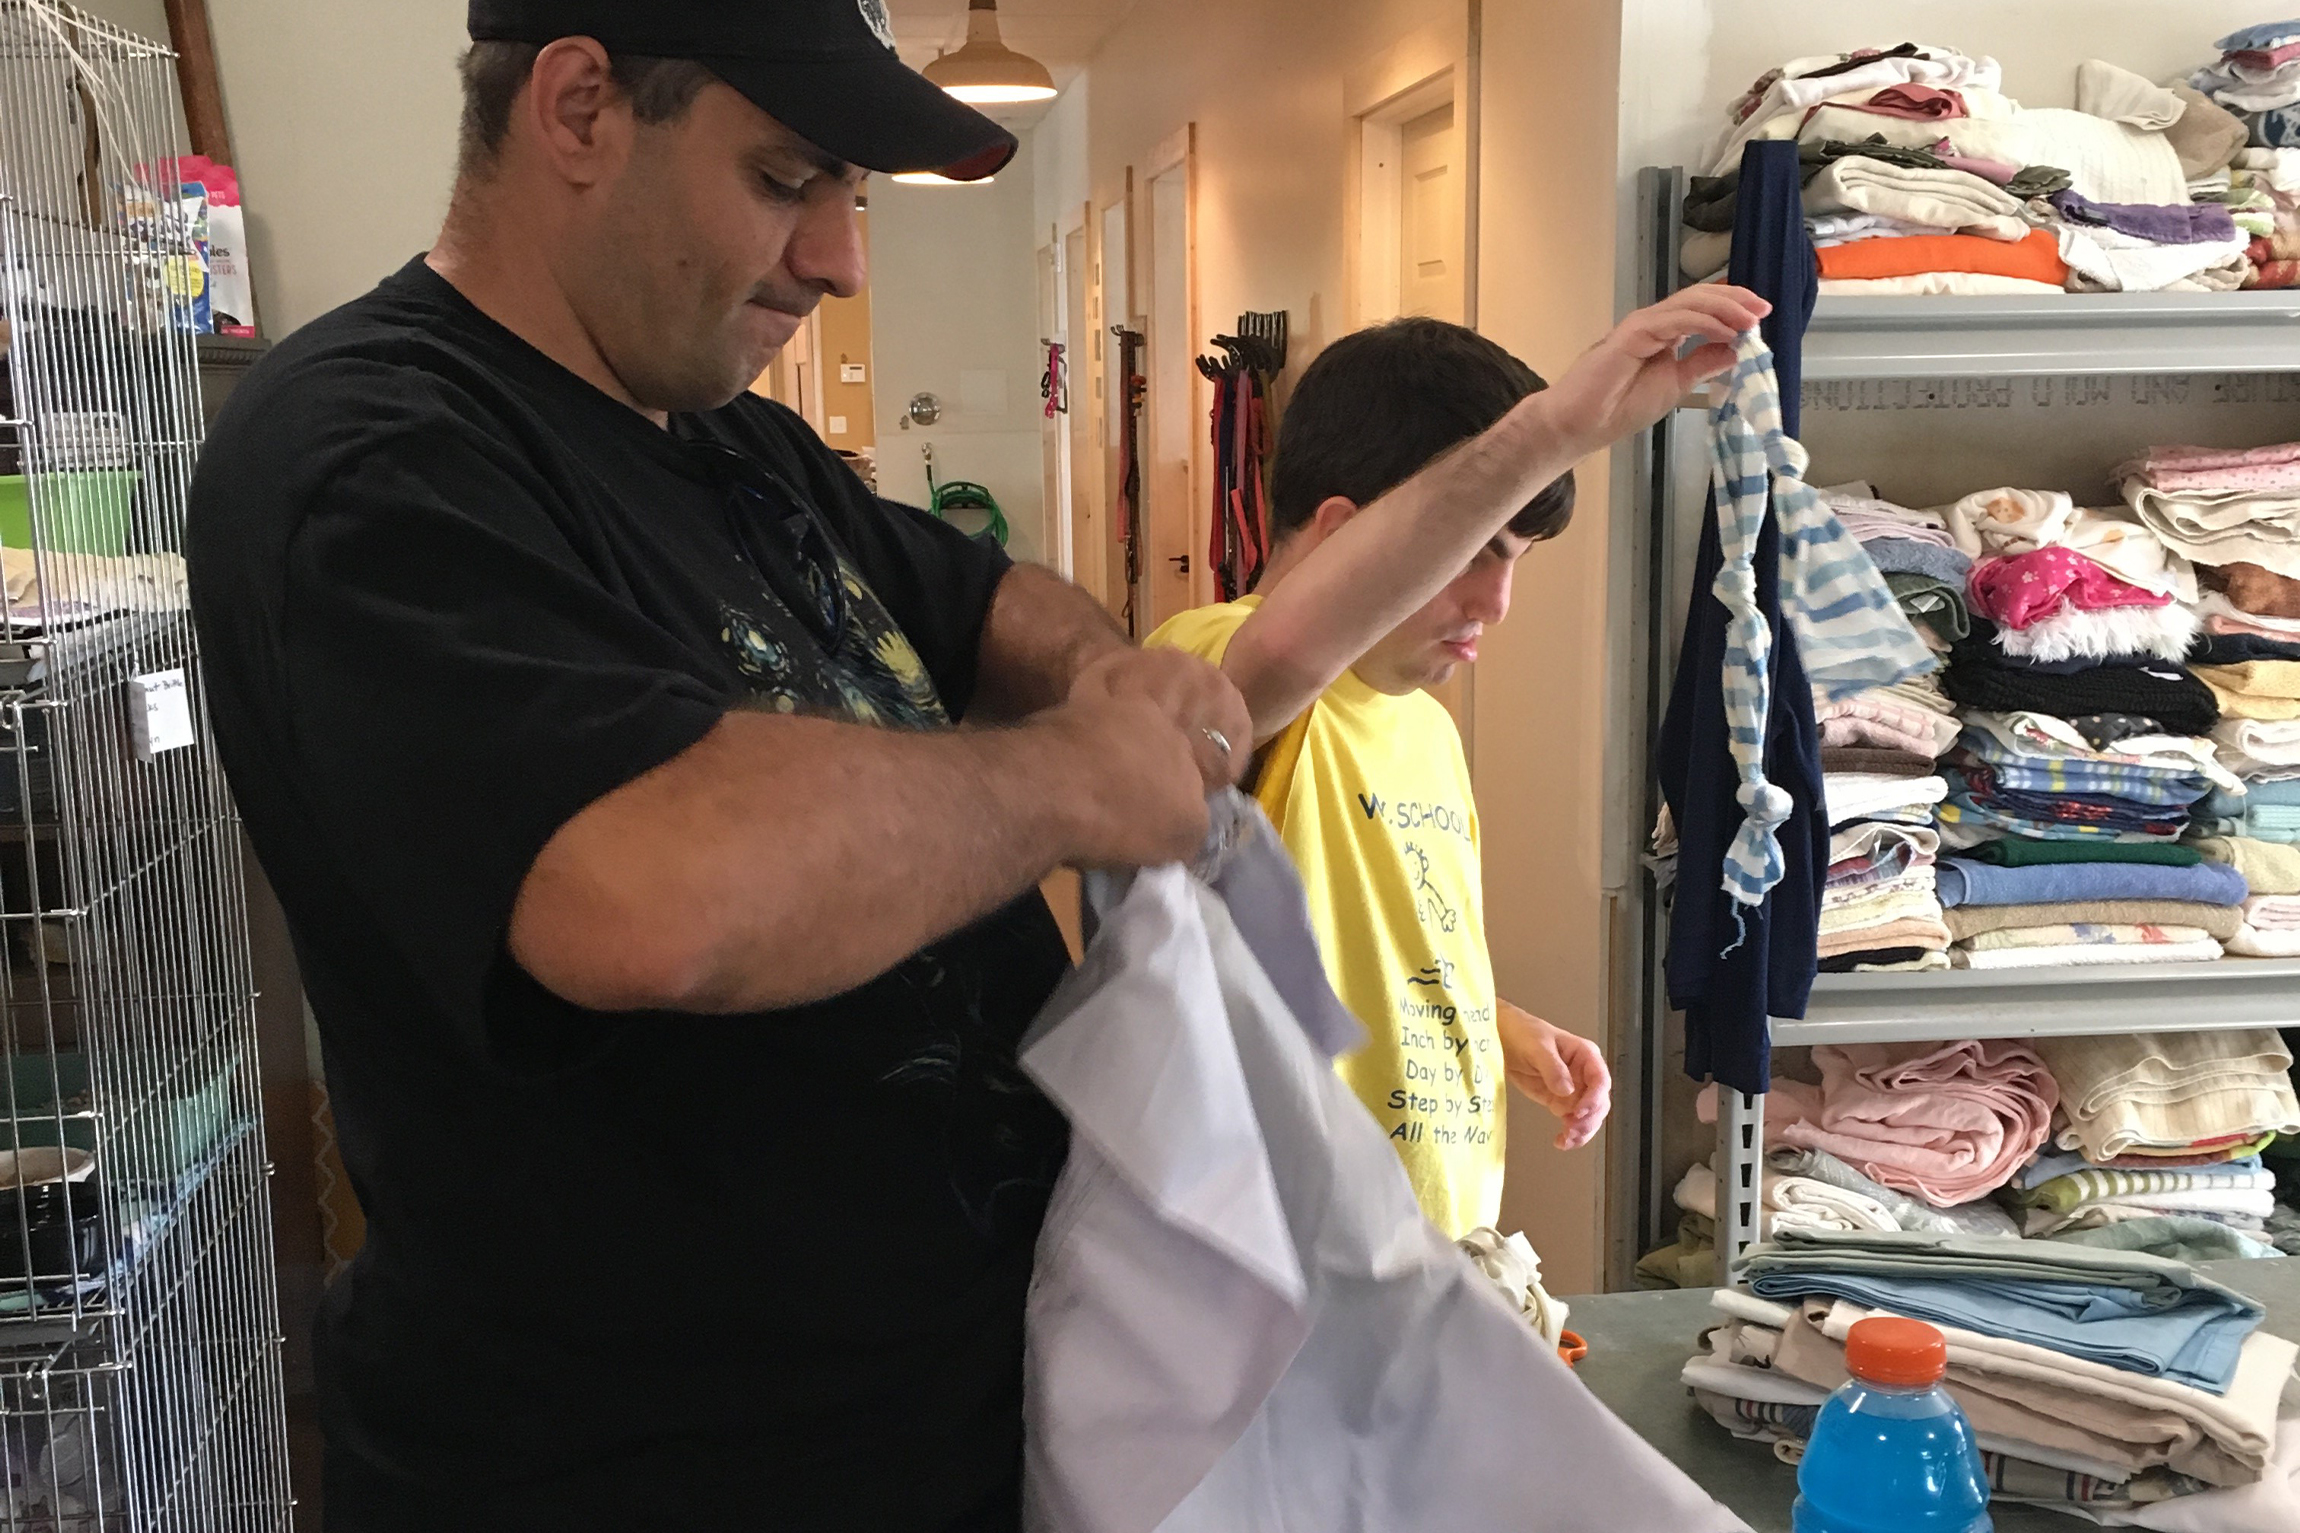 Home maintenance skills like folding laundry are taught at the Life Skills Center.